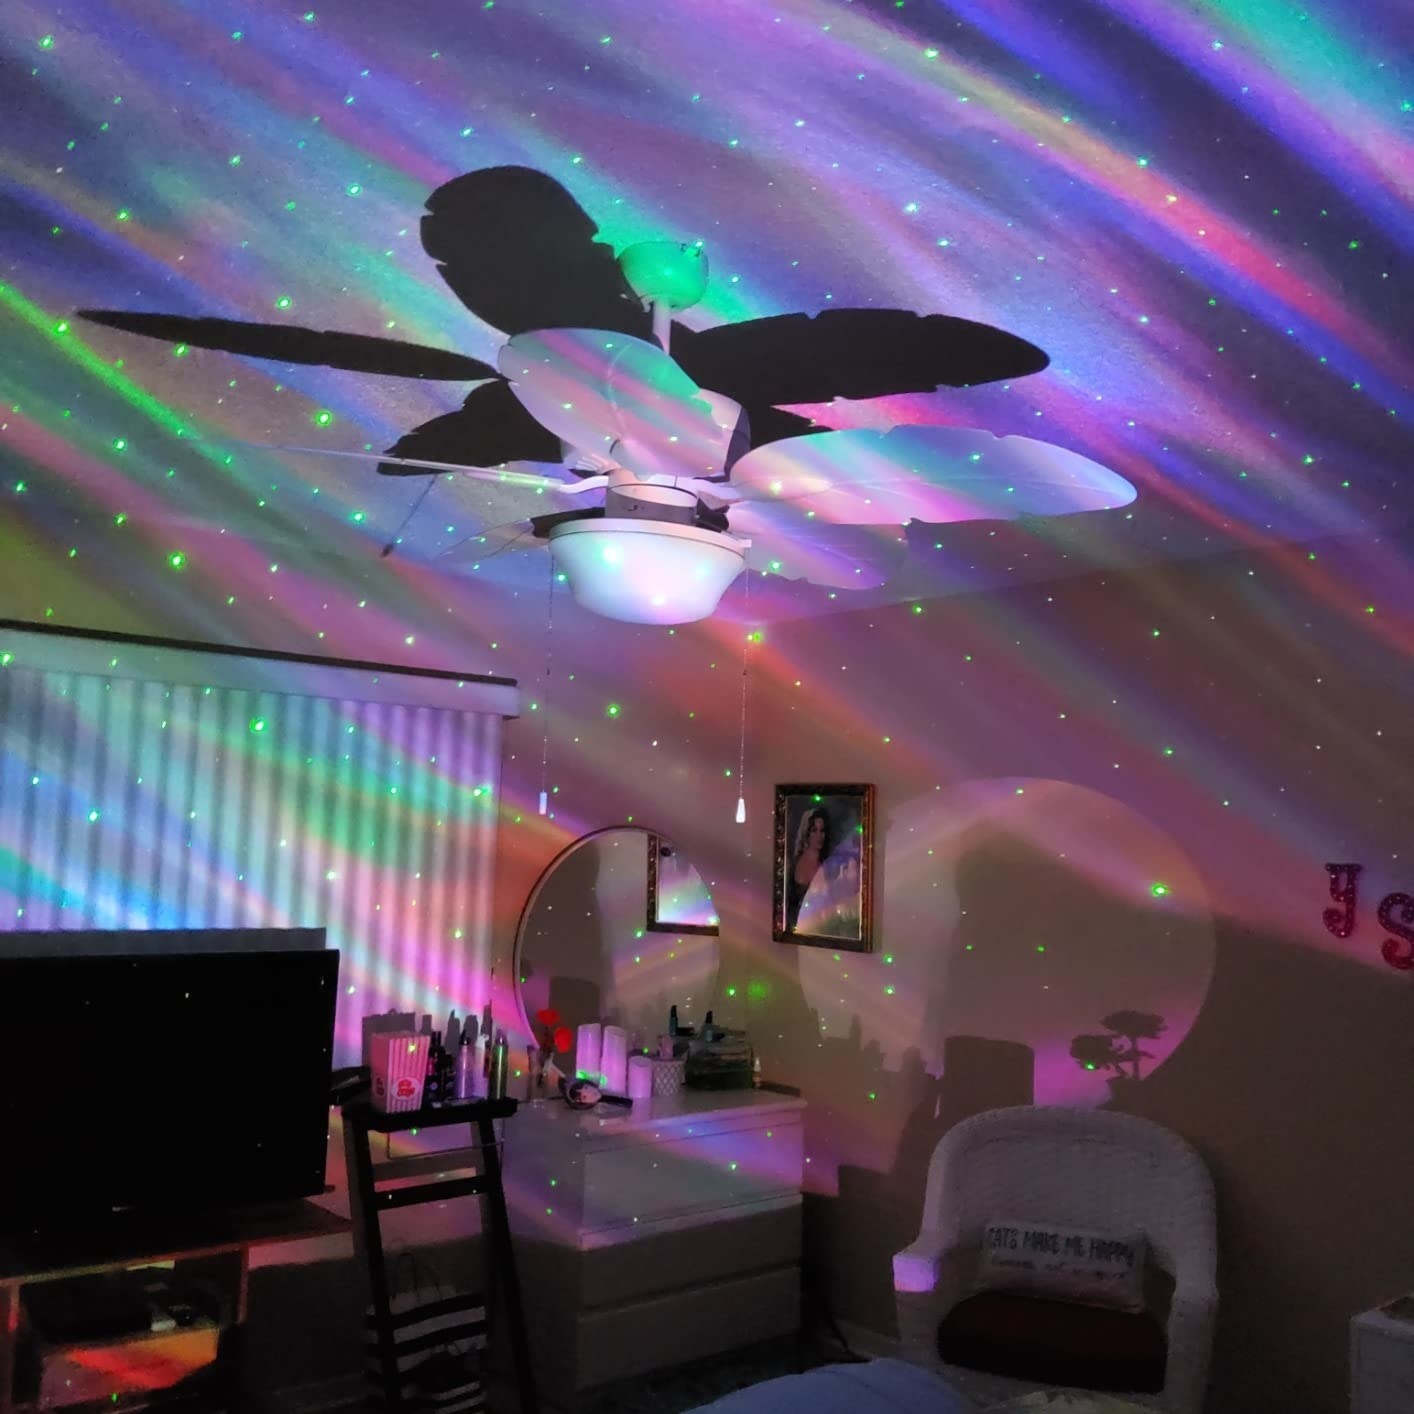 the galaxy light shining blue, purple, pink, and green lighting across a room with little stars